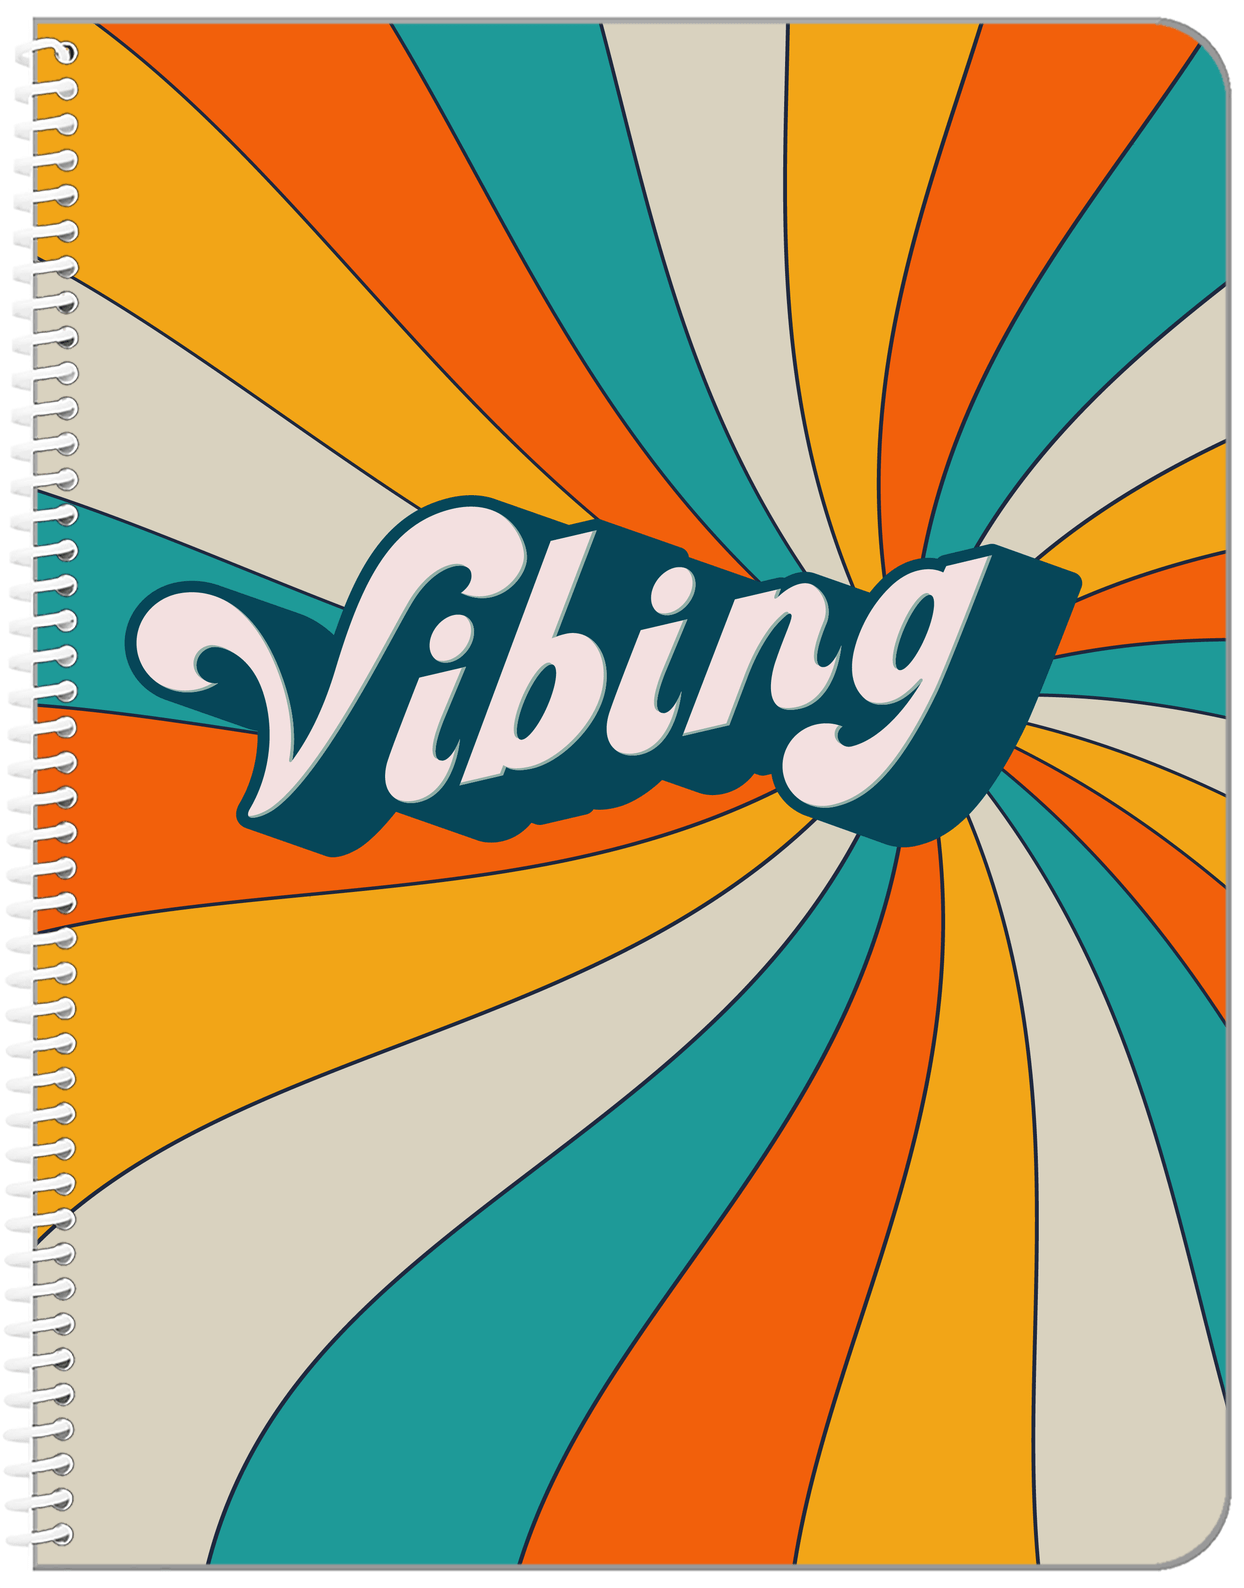 Retro Vibing Notebook - Front View